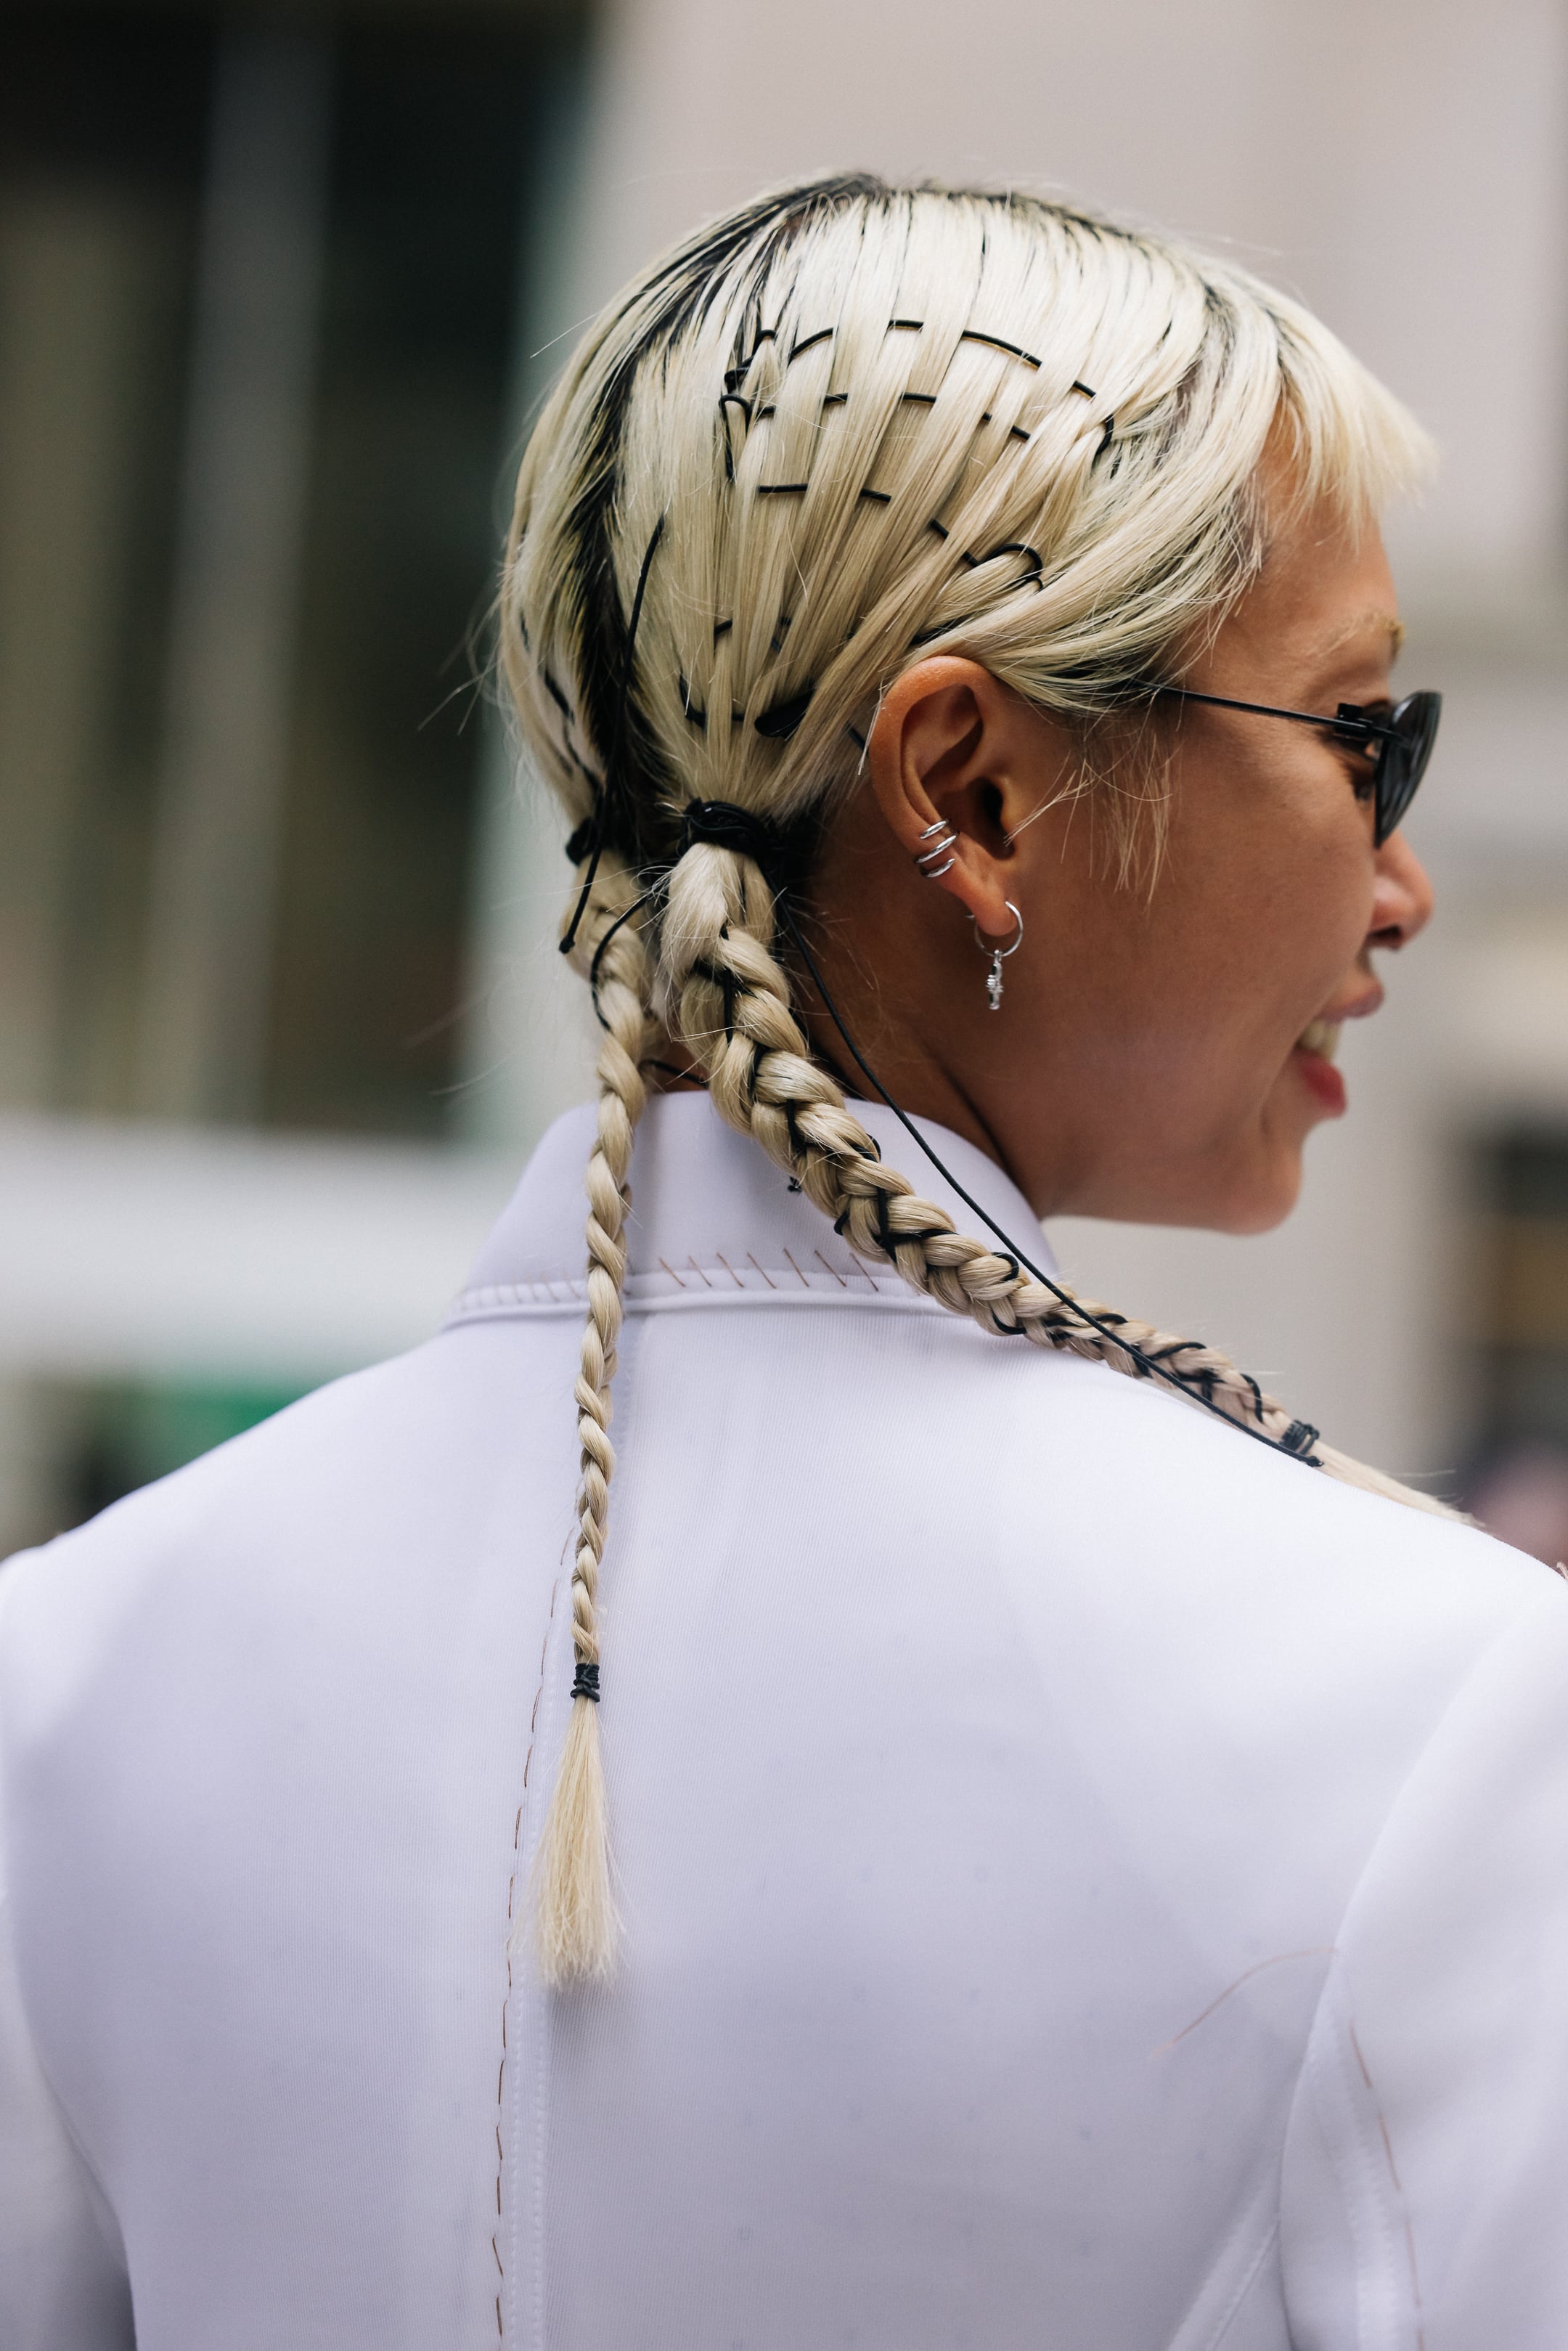 Best Trendy Hair Accessories to Shop: Designer Clips, Pins, and More